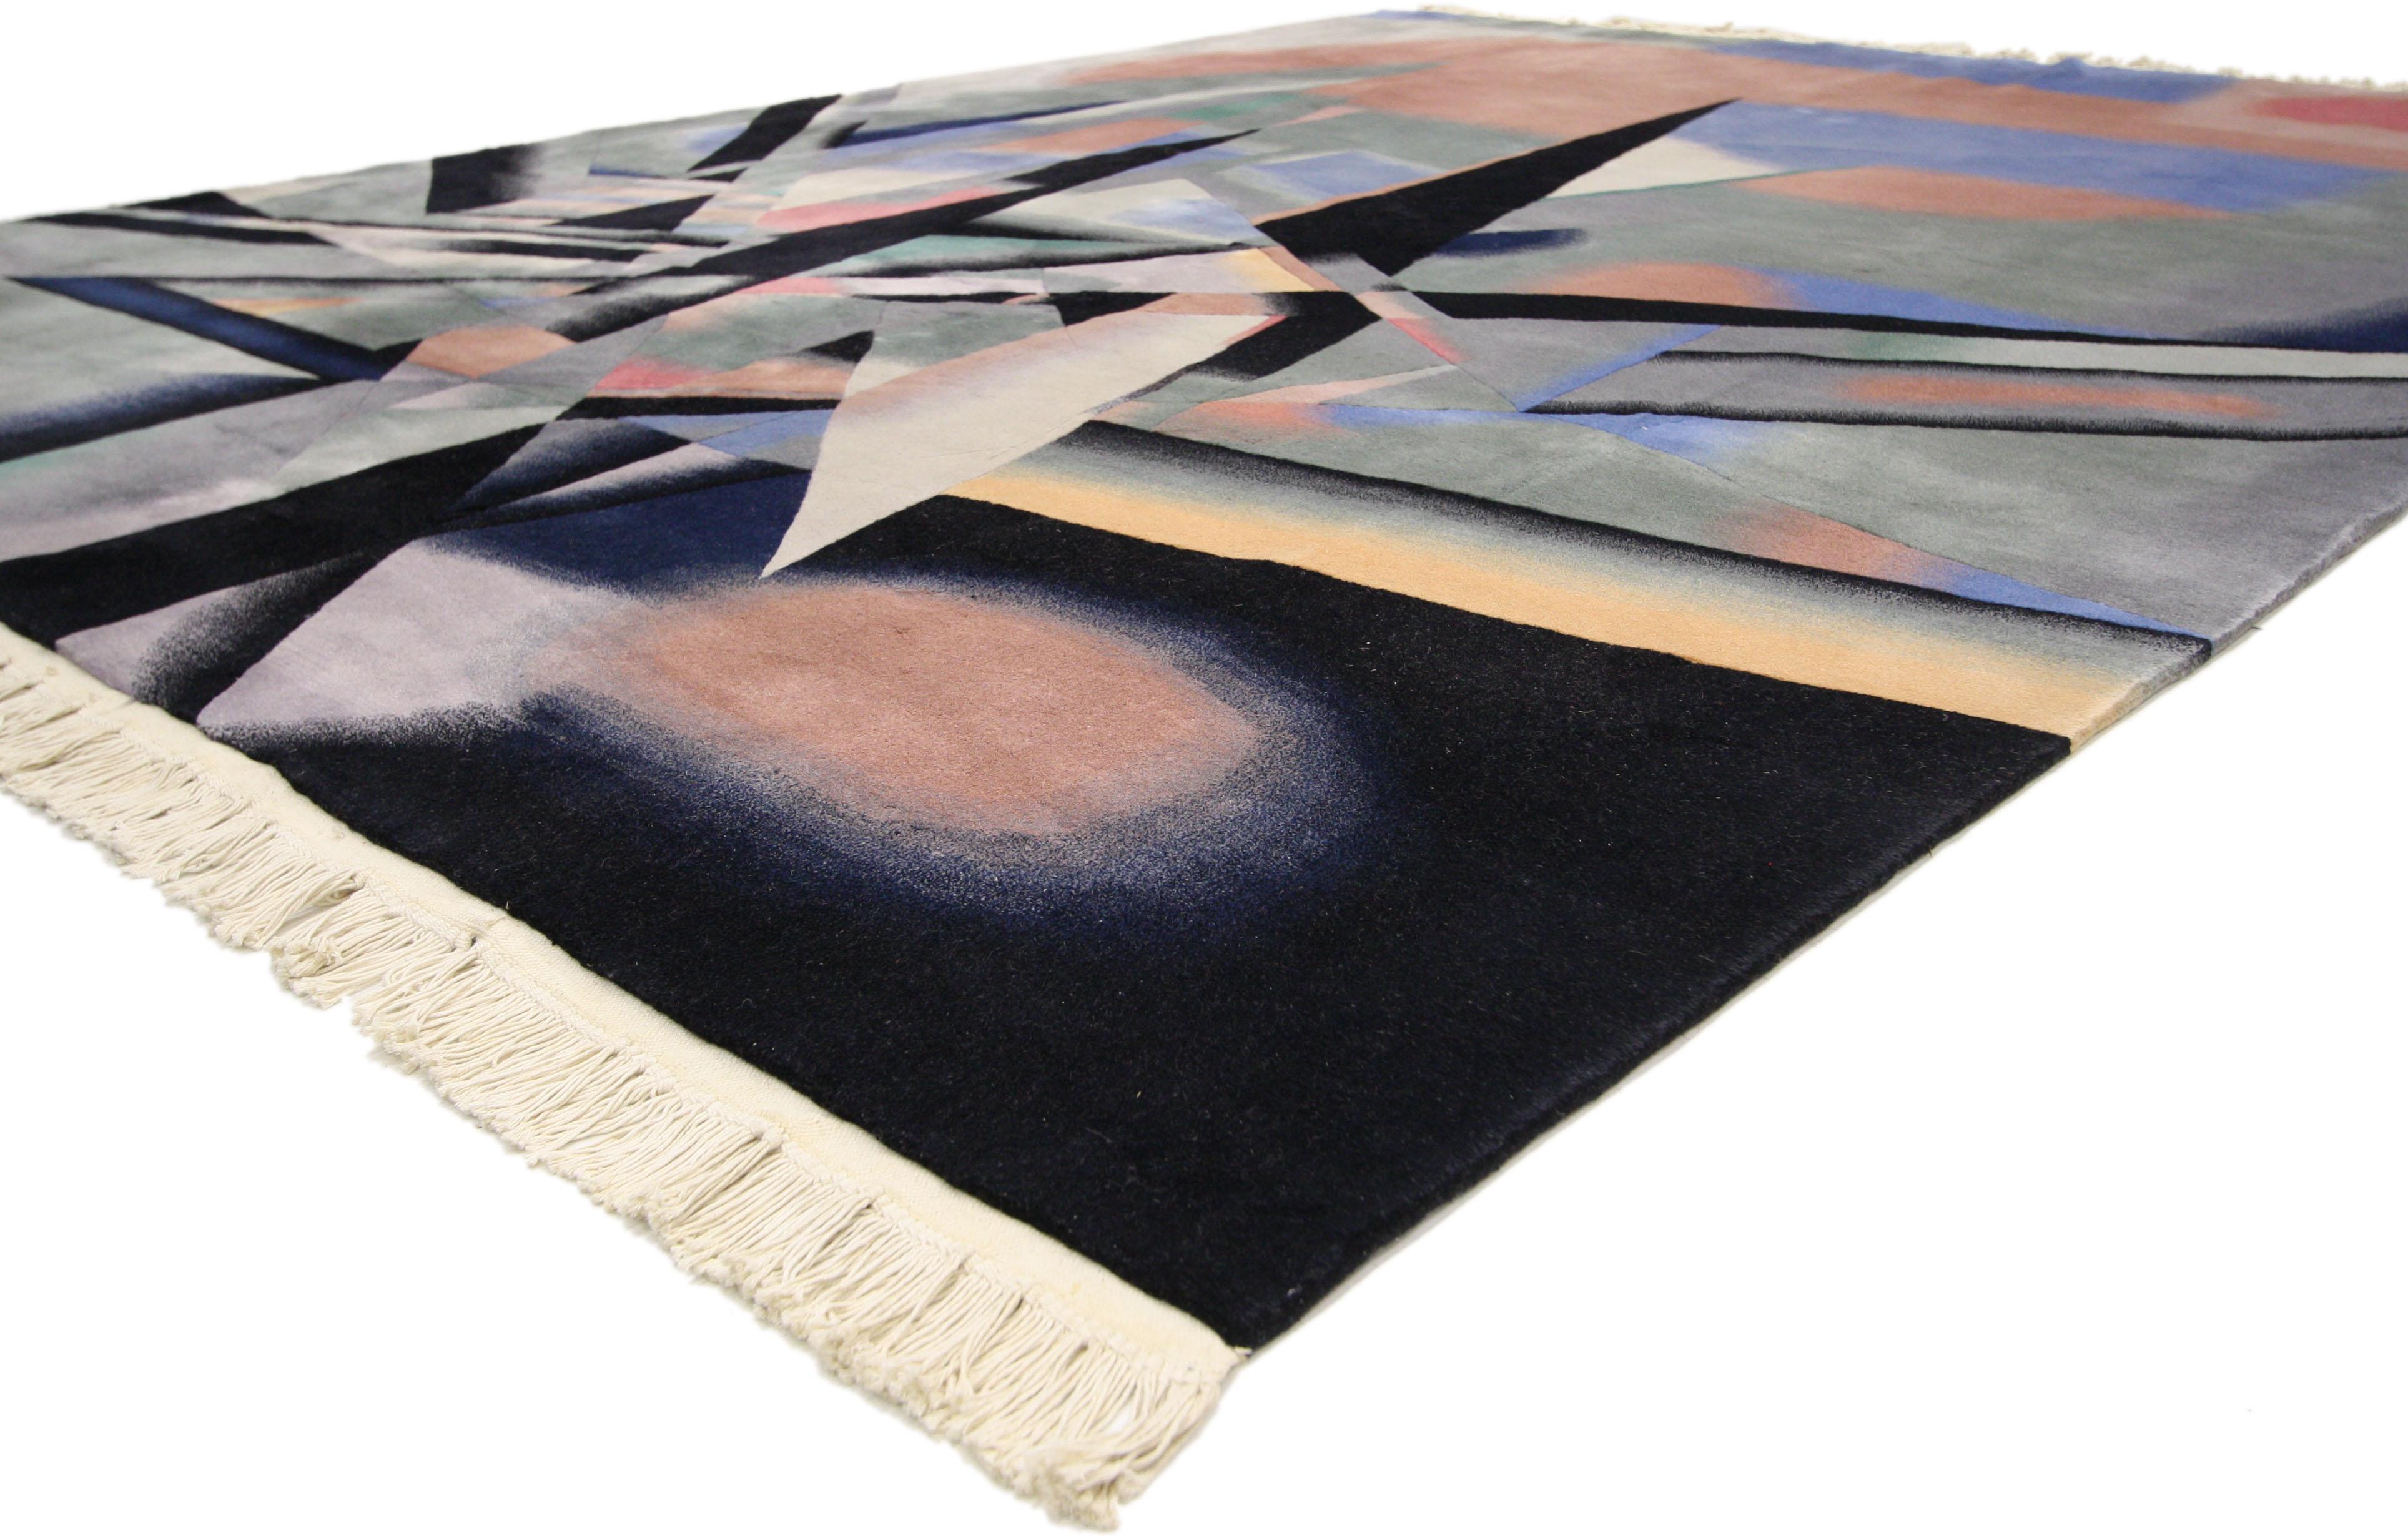 77181 Vintage Chinese rug with Abstract Expressionism Style 07'08 x 09'09. More than the profoundly influential visual arts style and asymmetrical beauty found in the geometric pattern, this hand-knotted wool vintage Chinese rug features a